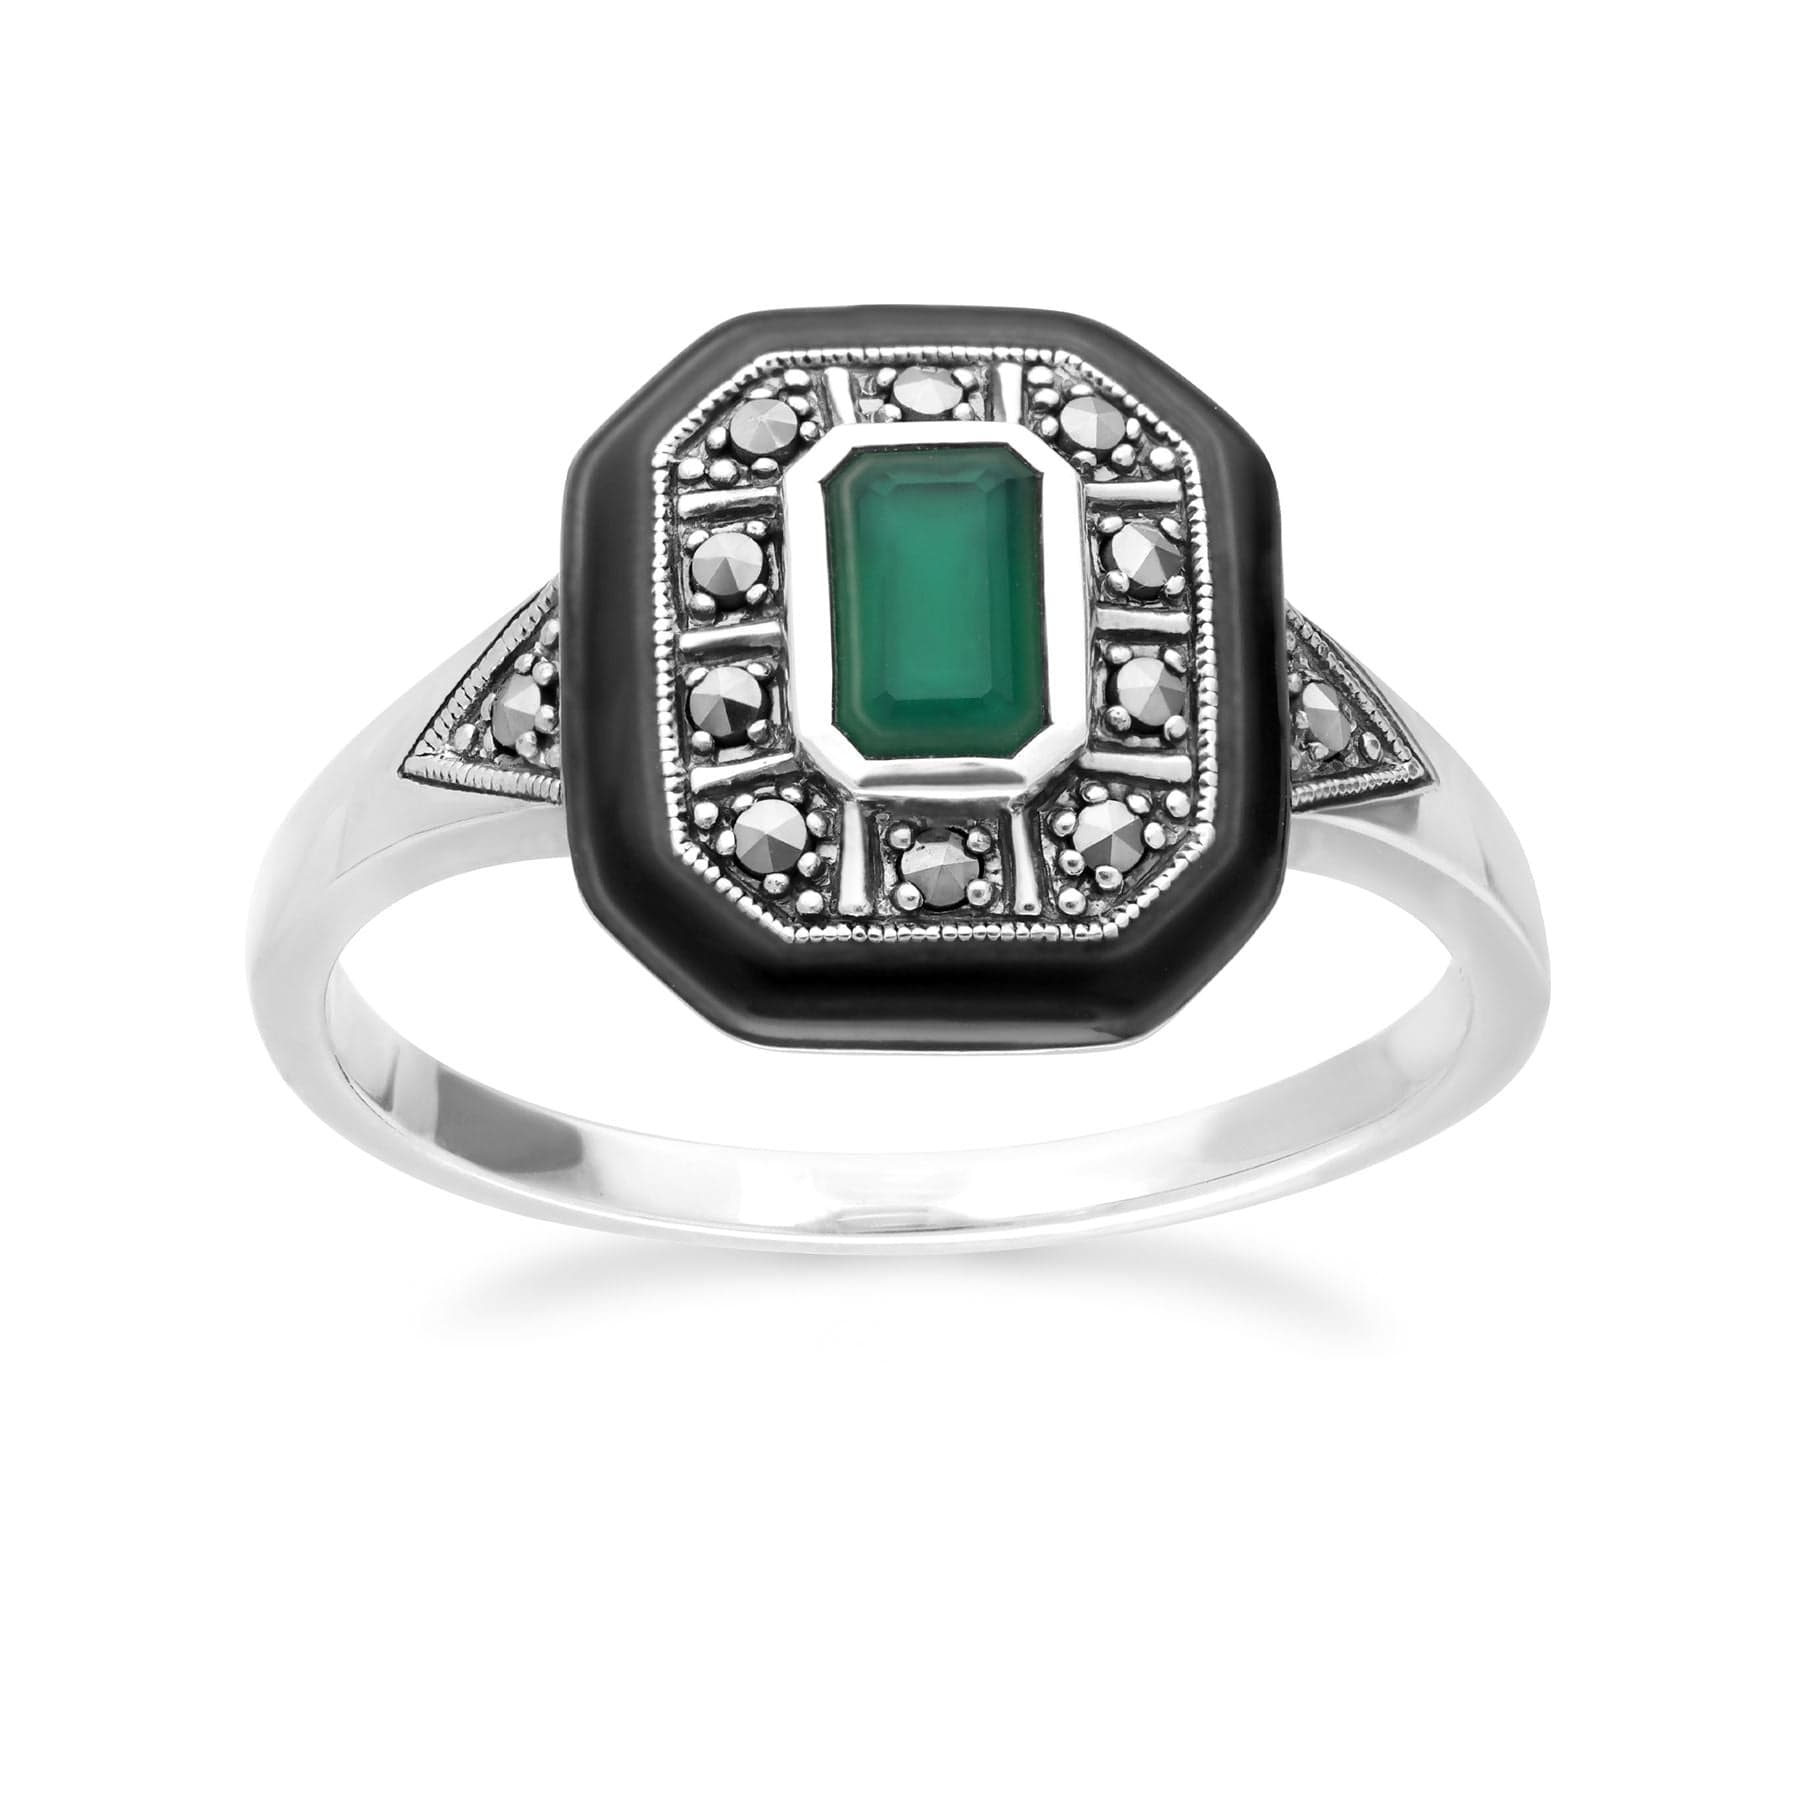 214R608001925 Art Deco Inspired Chalcedony, Enamel & Marcasite Square Ring In Sterling Silver 2